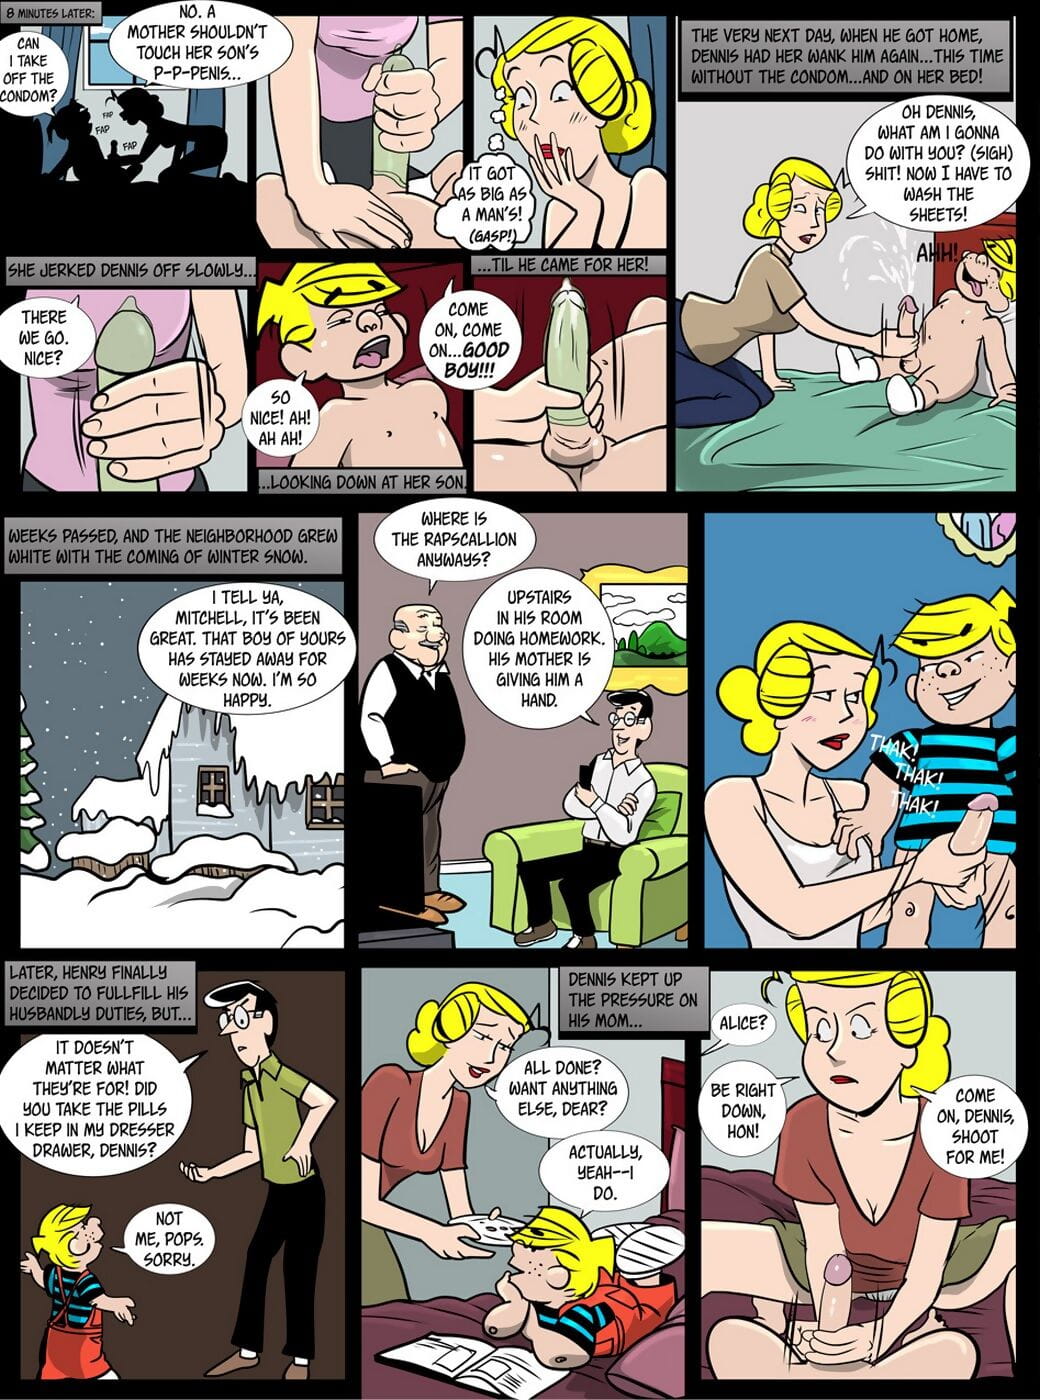 Everfire- Dennis the Menace page 1